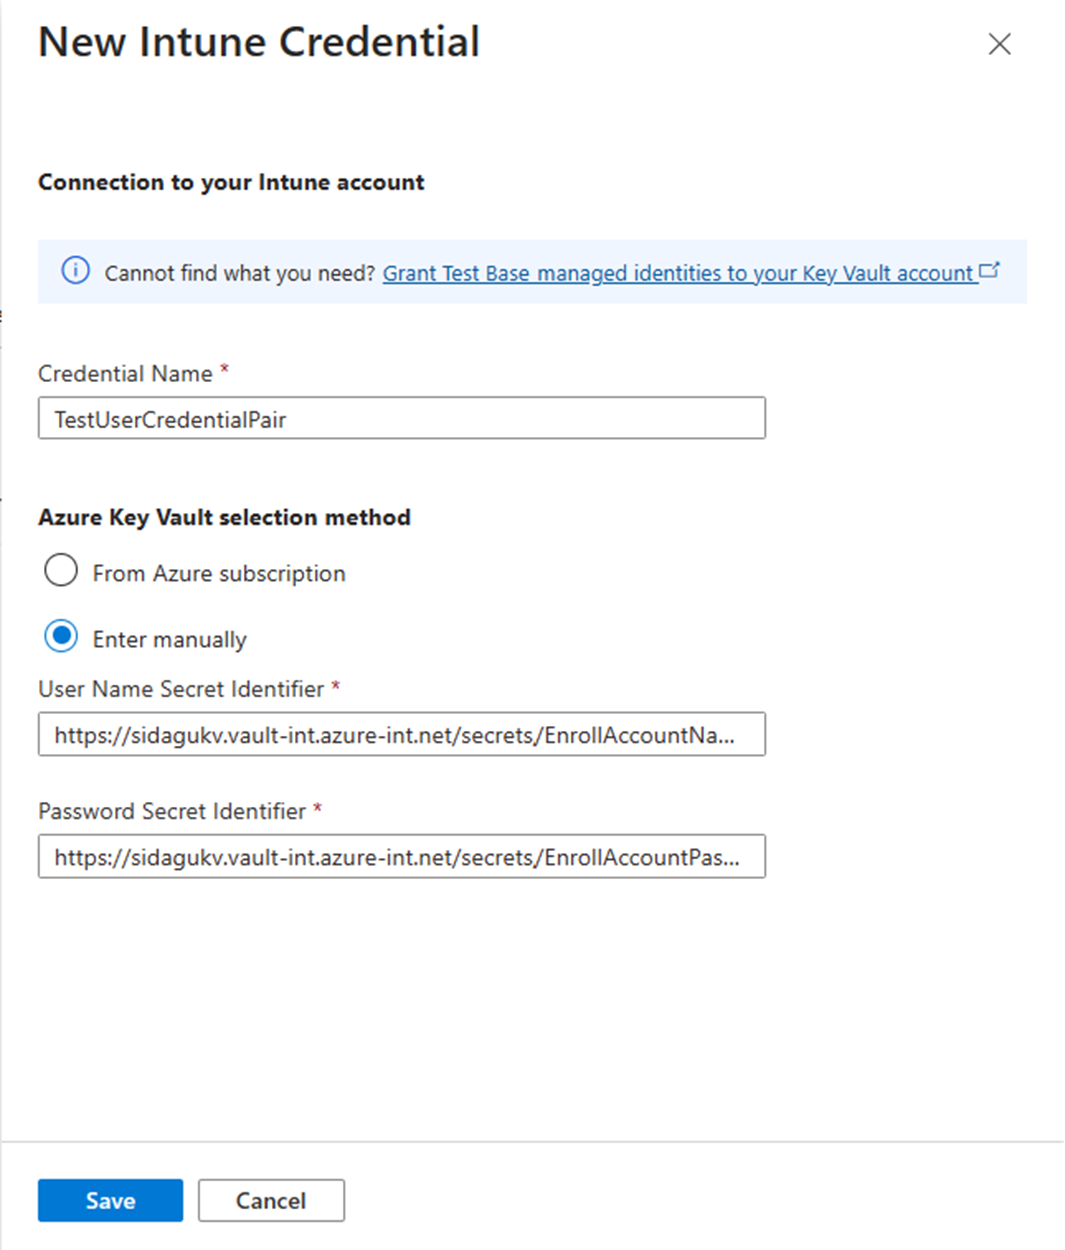 Screenshot of the new intune credentials page when choose enter manually.